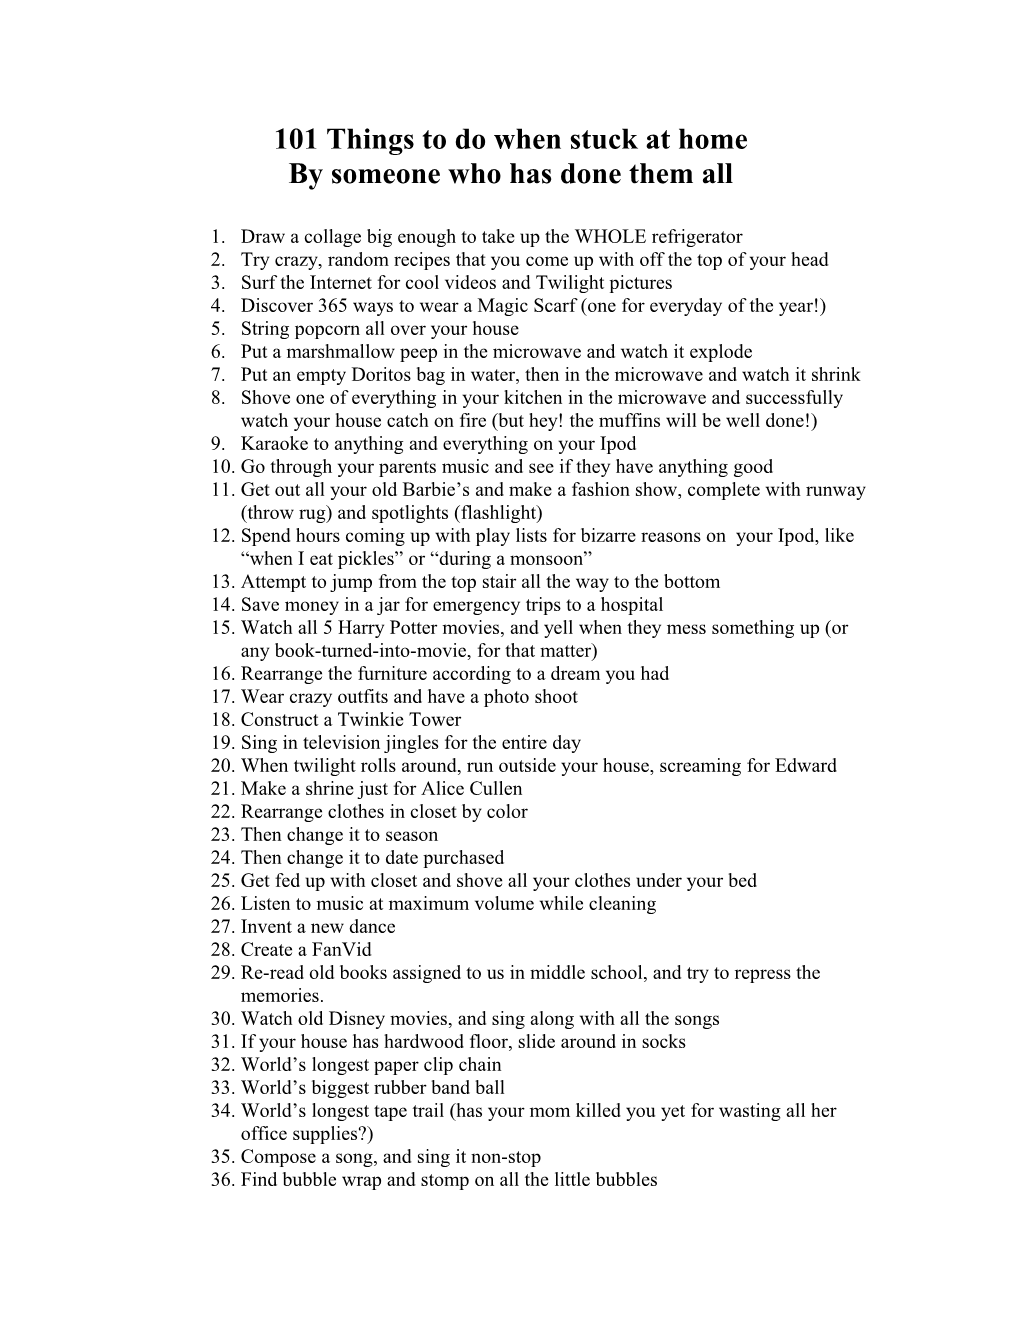 101 Things to Do When Stuck at Home